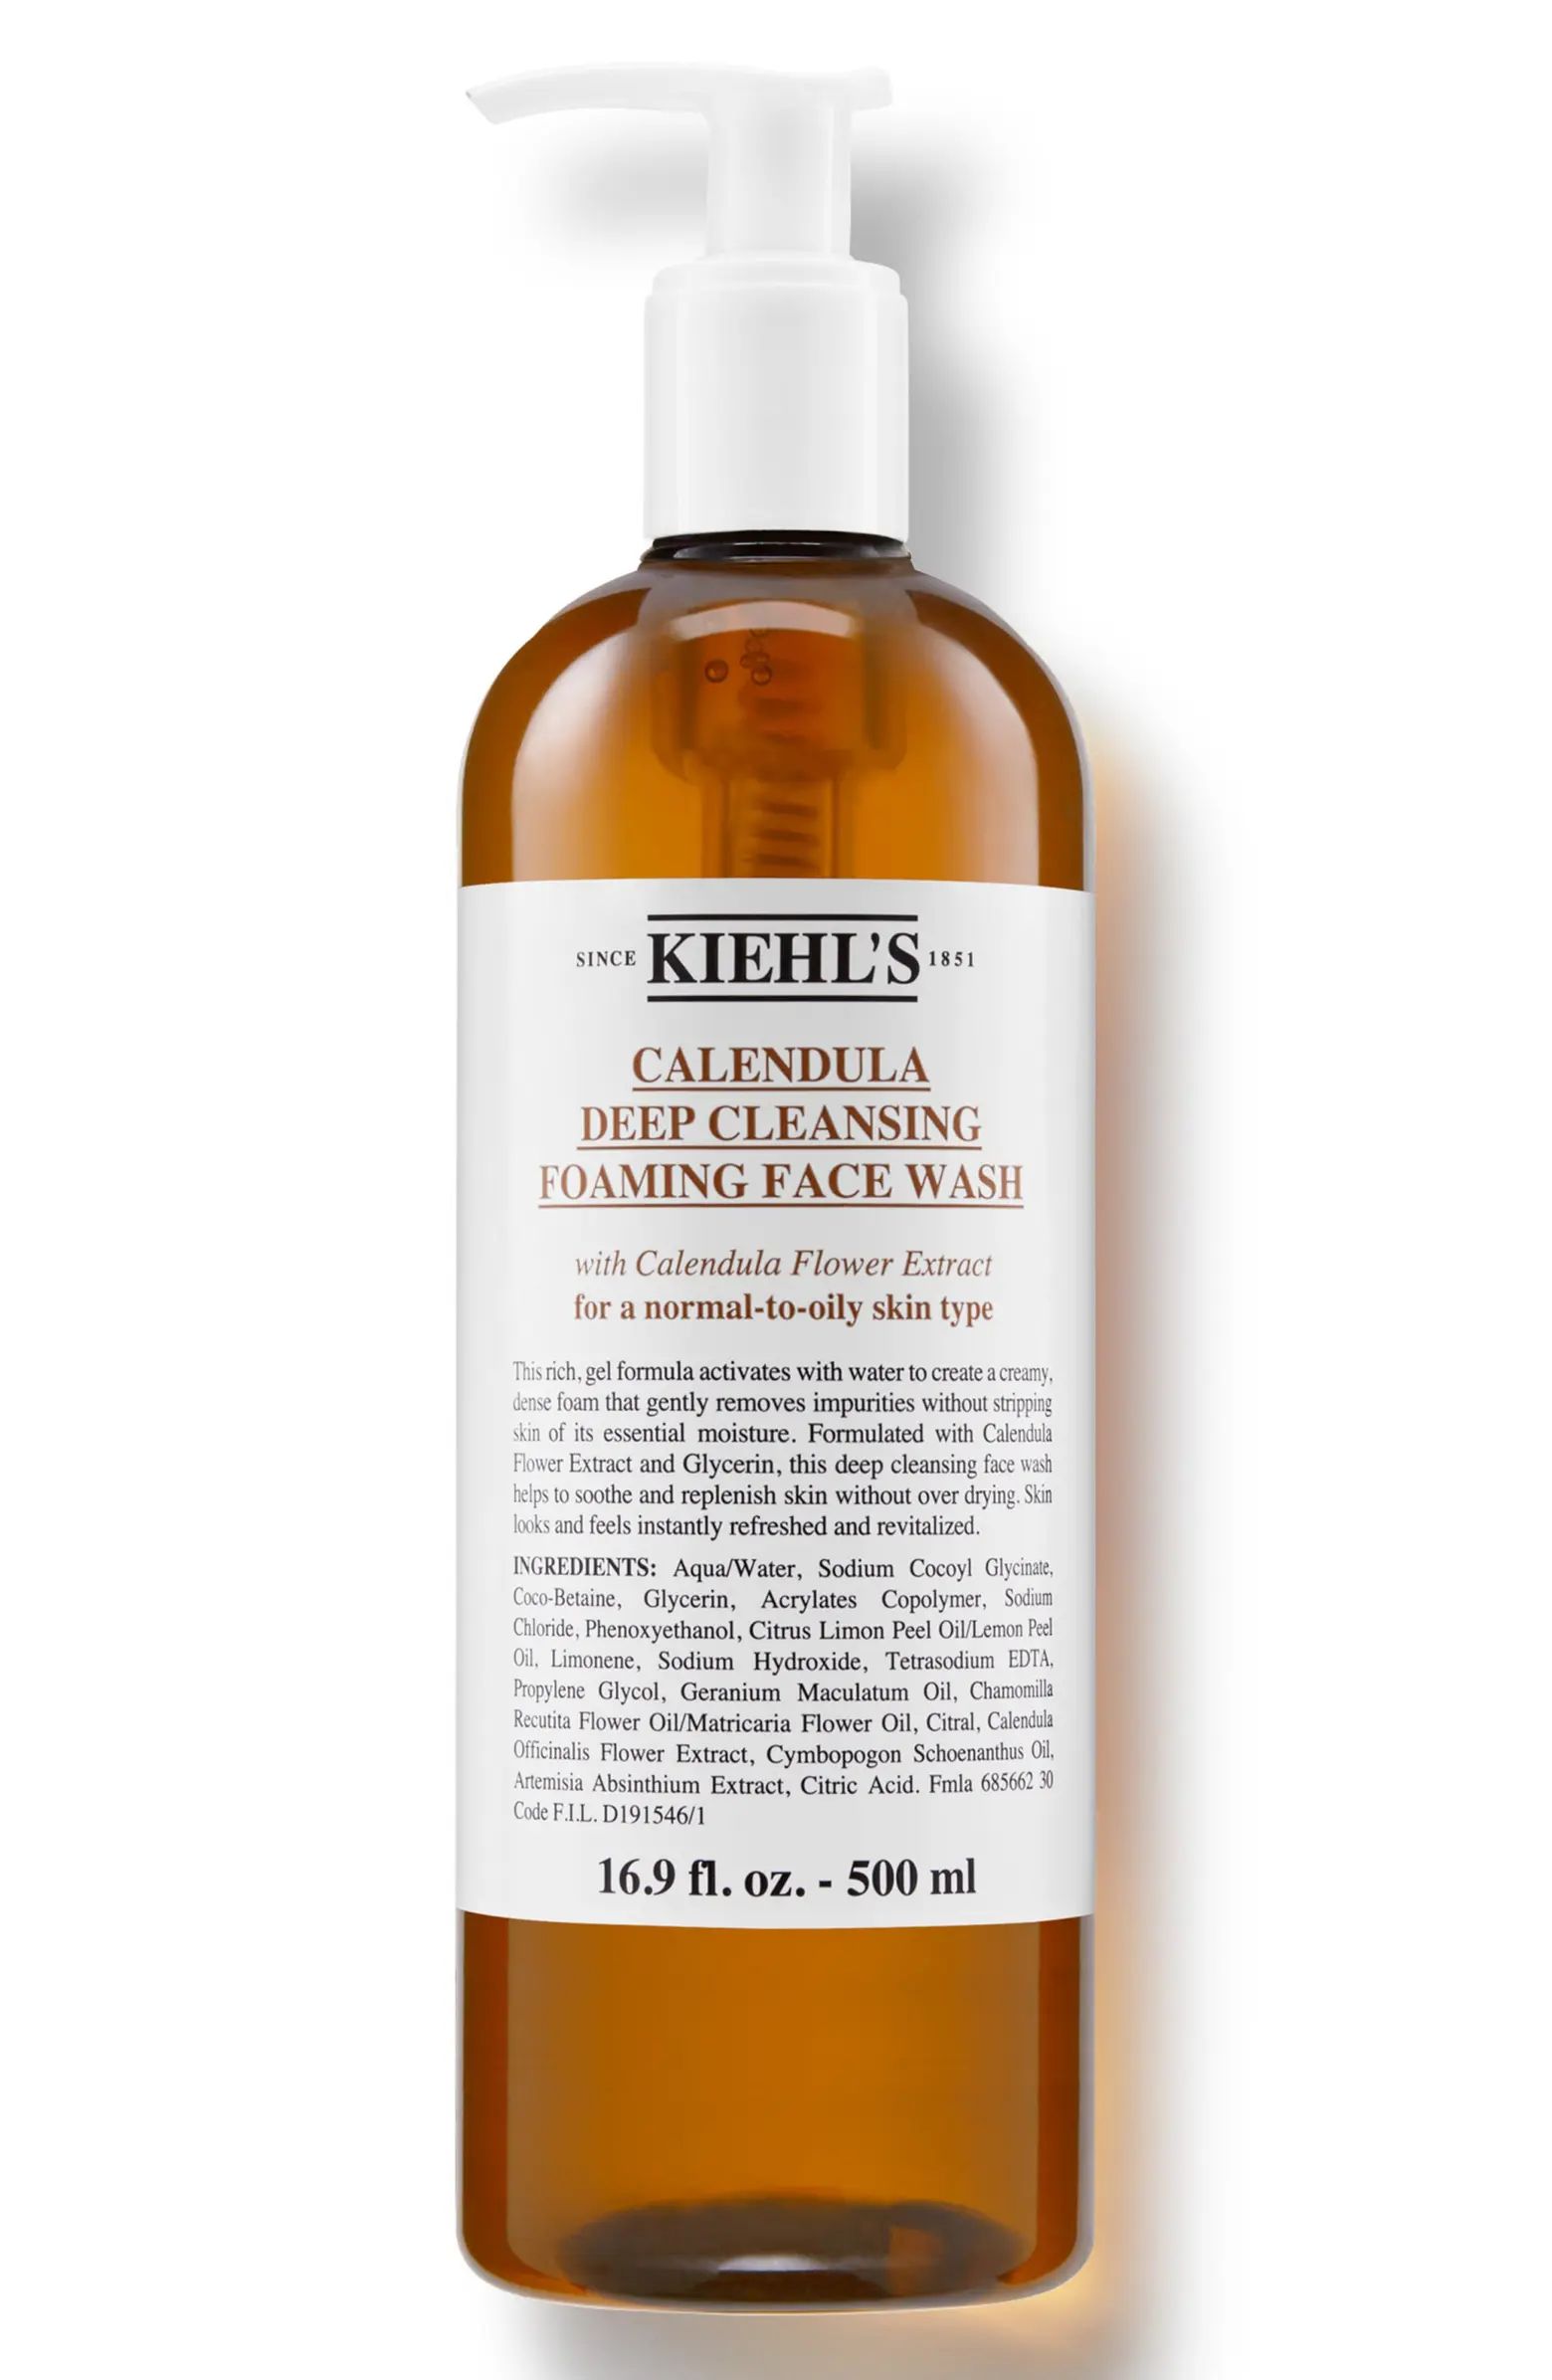 Calendula Deep Cleansing Foaming Face Wash for Normal-to-Oily Skin | Nordstrom